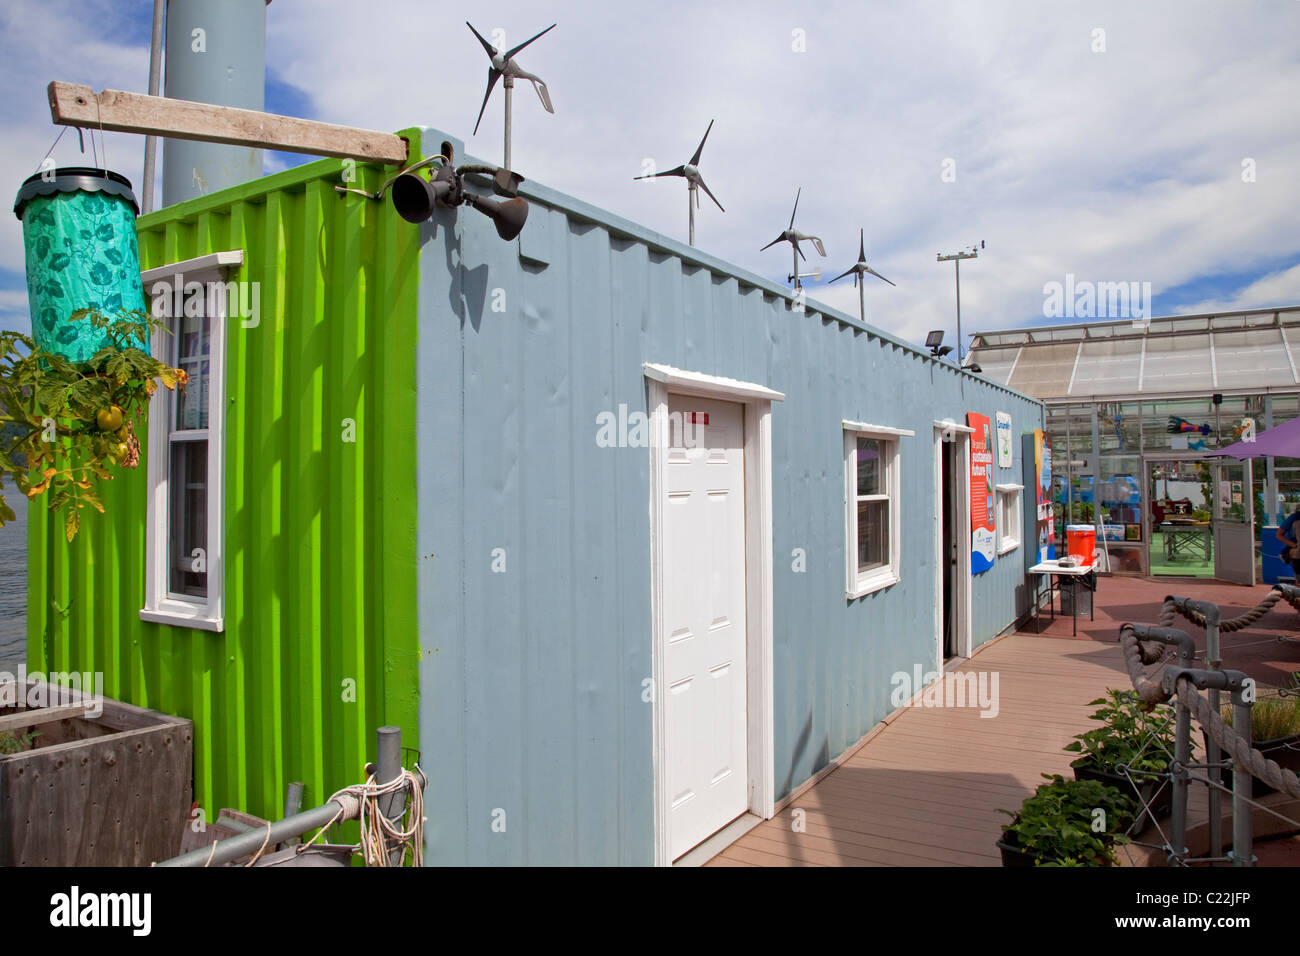 The Science Barge is a completely sustainable Urban Farm used for educating schoolchildren and the general public. Yonkers, NY Stock Photo